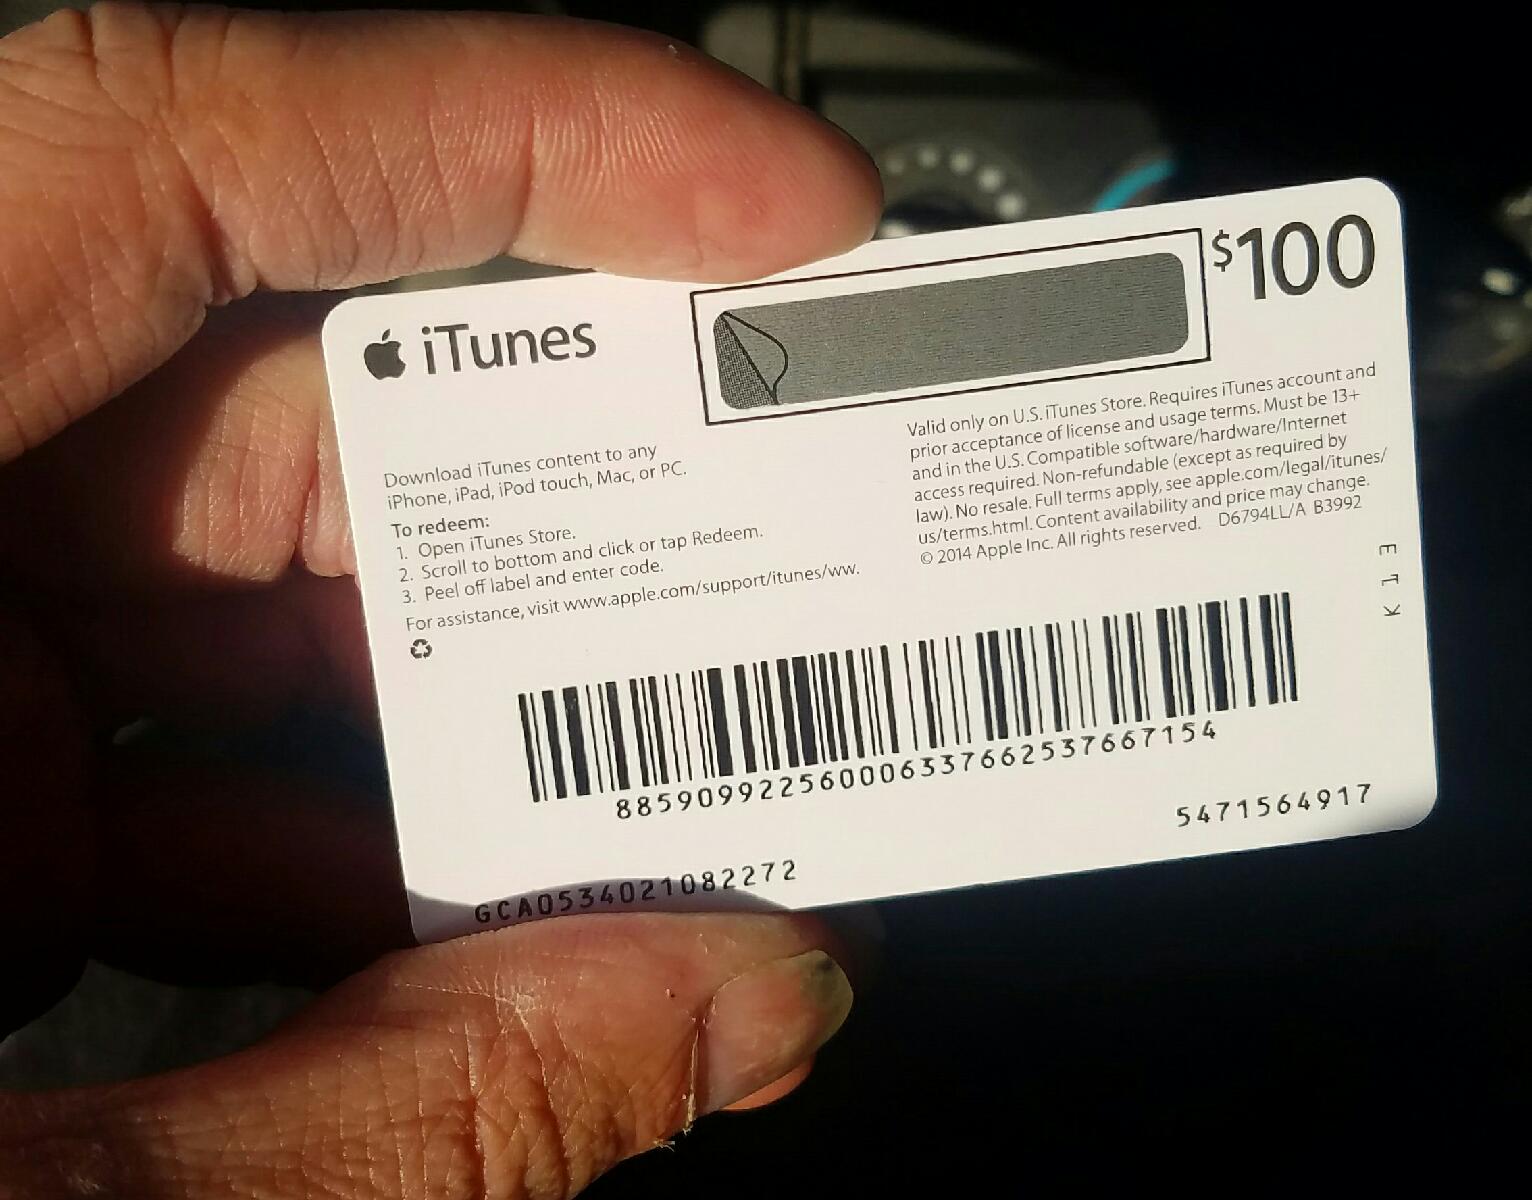 Sell Your Itunes Gift Card Here (We Buy iTunes Gift Cards